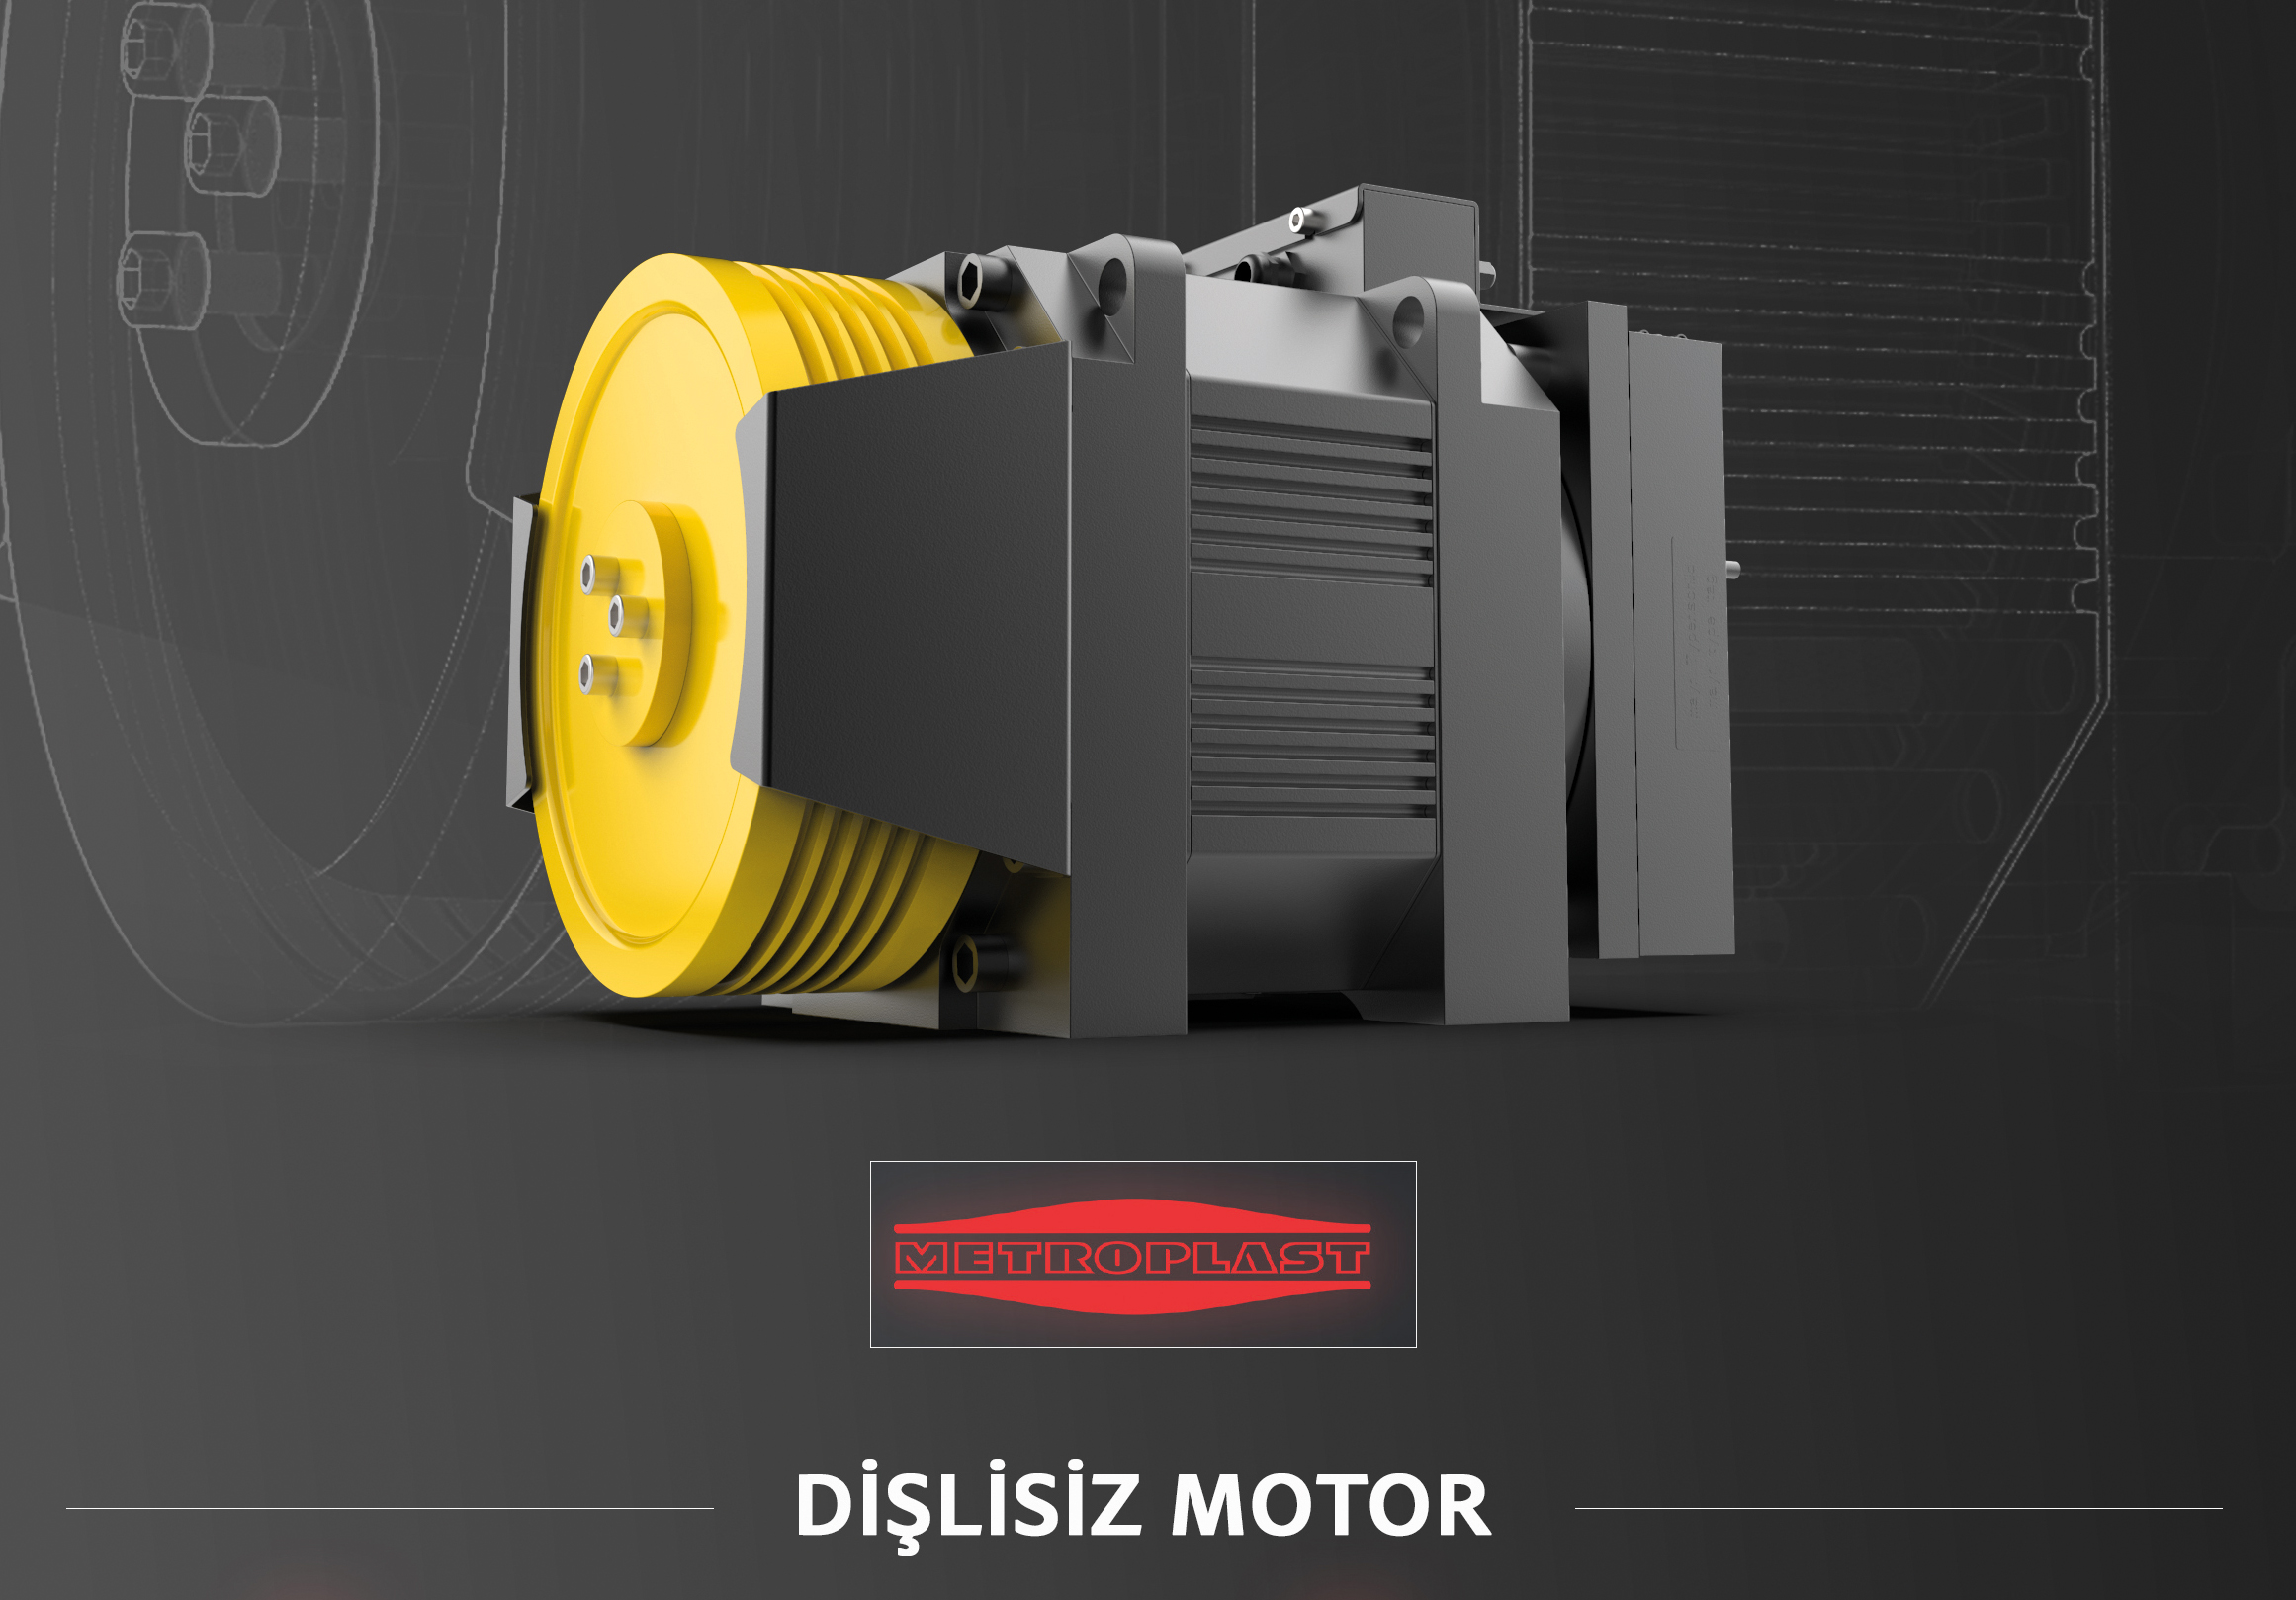  27 Eylül 2021,GEARLESS MOTOR FROM METROPLAST ASANSÖR, Elevator Vizyon Magazine, All What You Are Looking For is On This Site